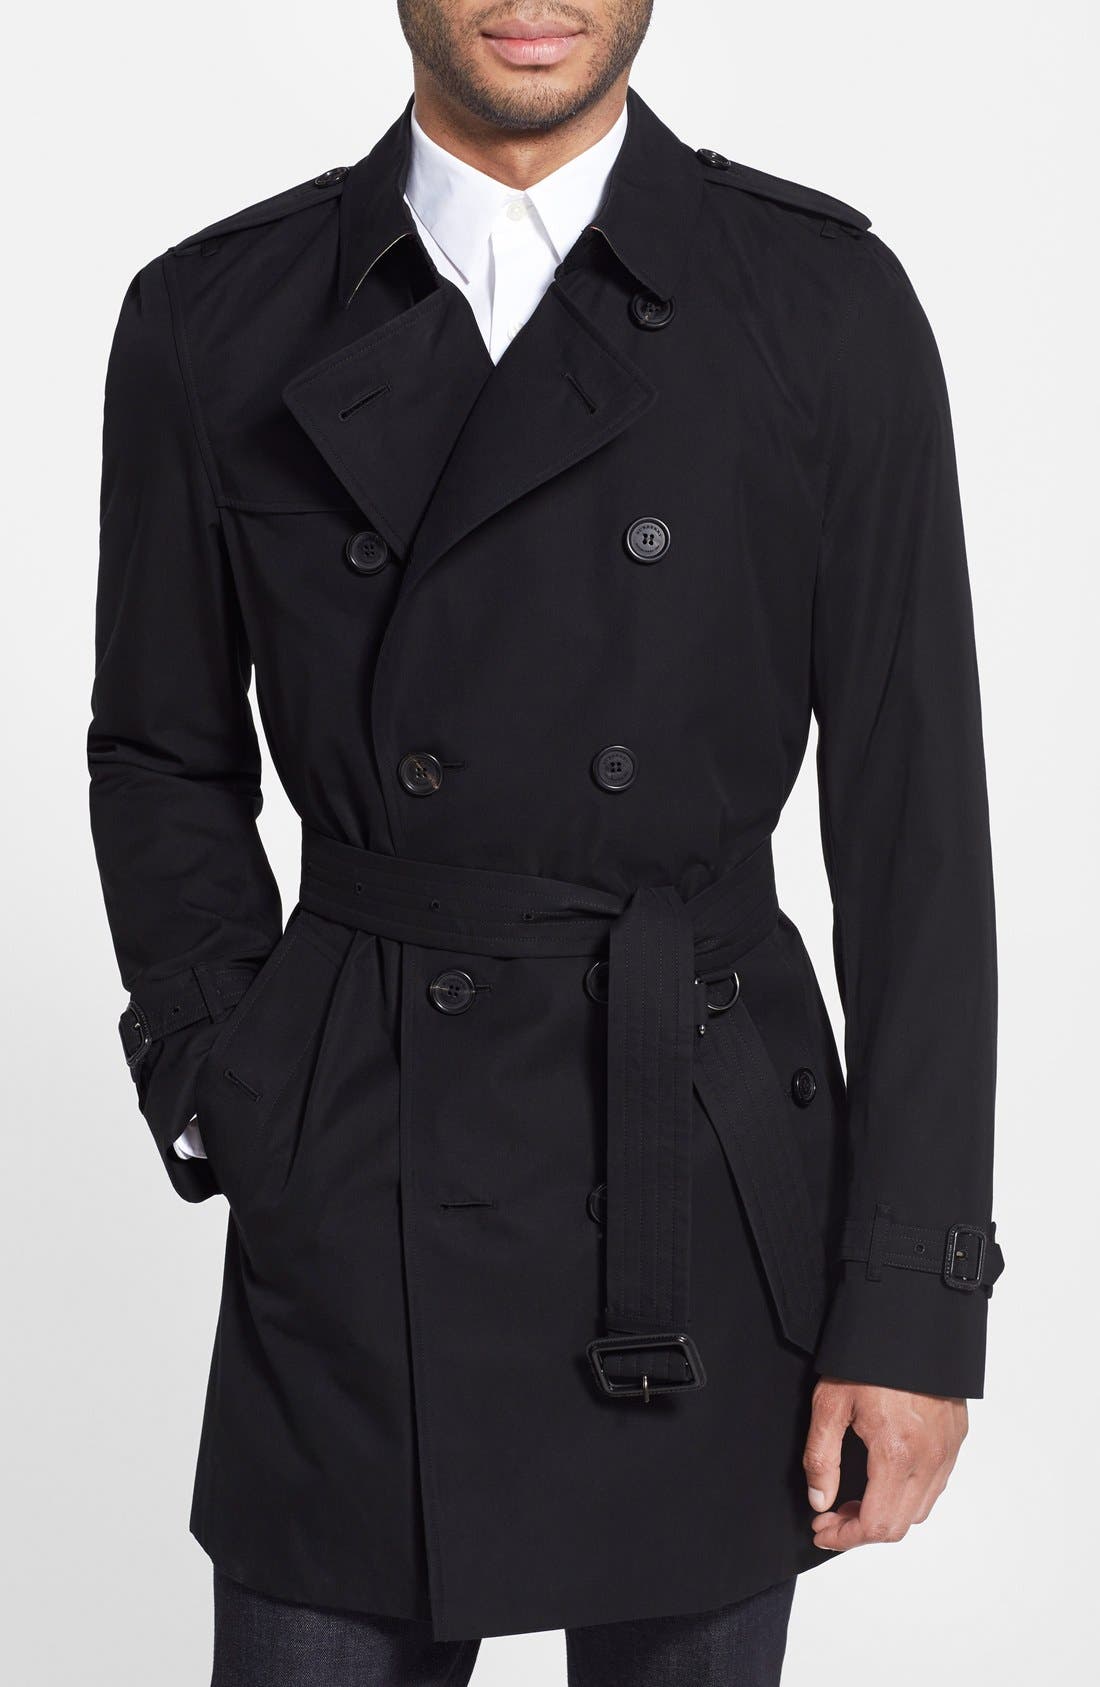 Burberry Trench Coat Belt Replacement 